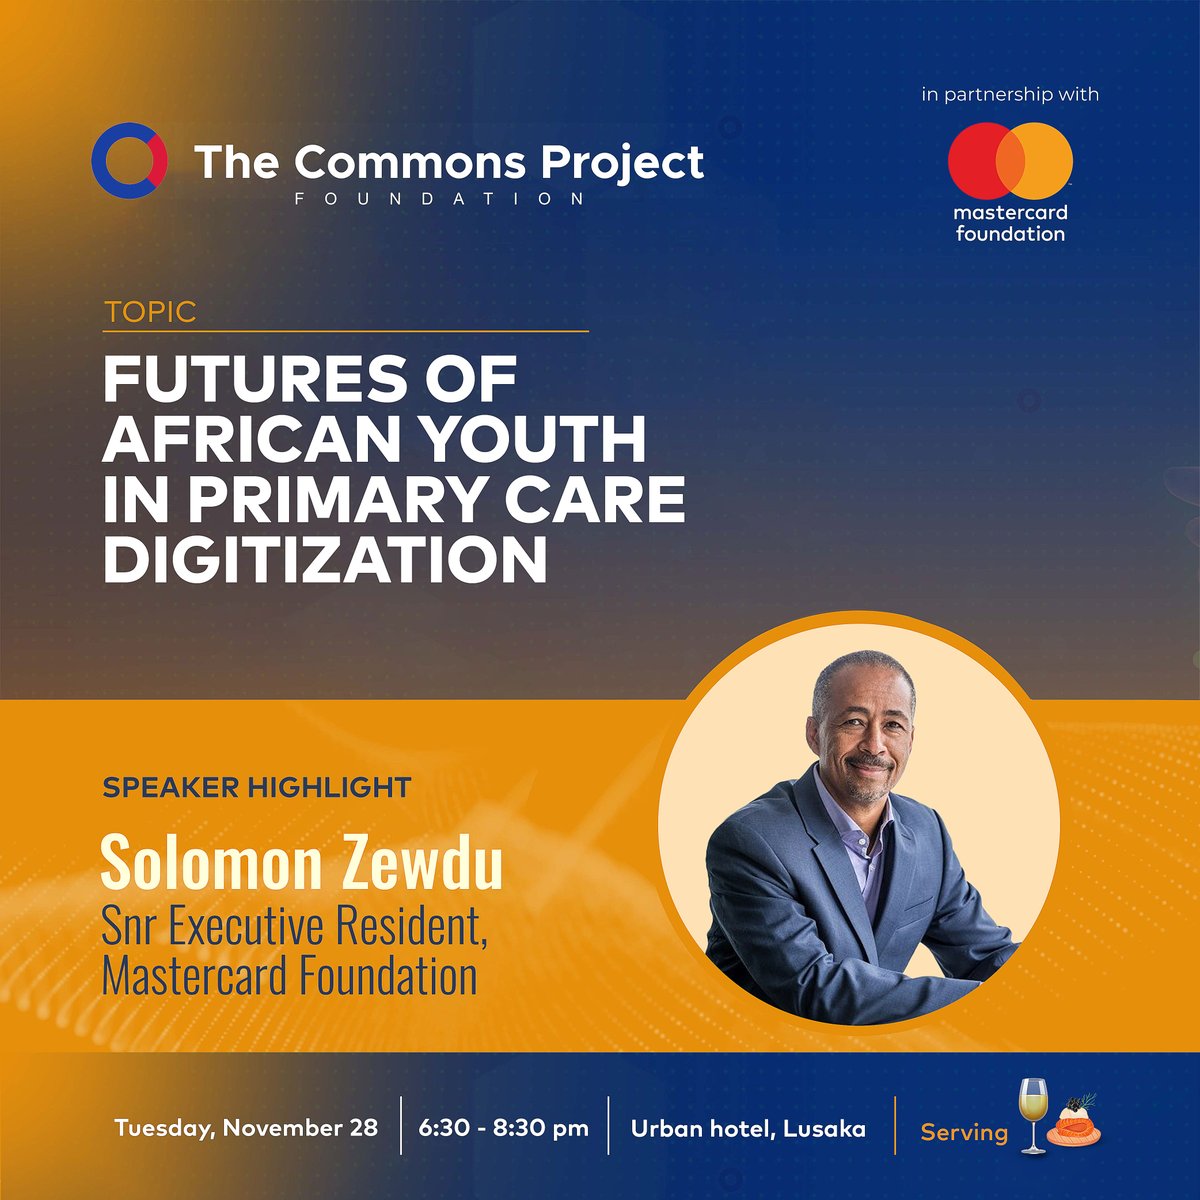 We are thrilled to collaborate with Solomon Zewdu, Snr Executive Resident, Mastercard Foundation at #CPHIA2023. It's an honor to work alongside such esteemed professionals. @MastercardFdn @CPHIA_AfricaCDC #CPHIA